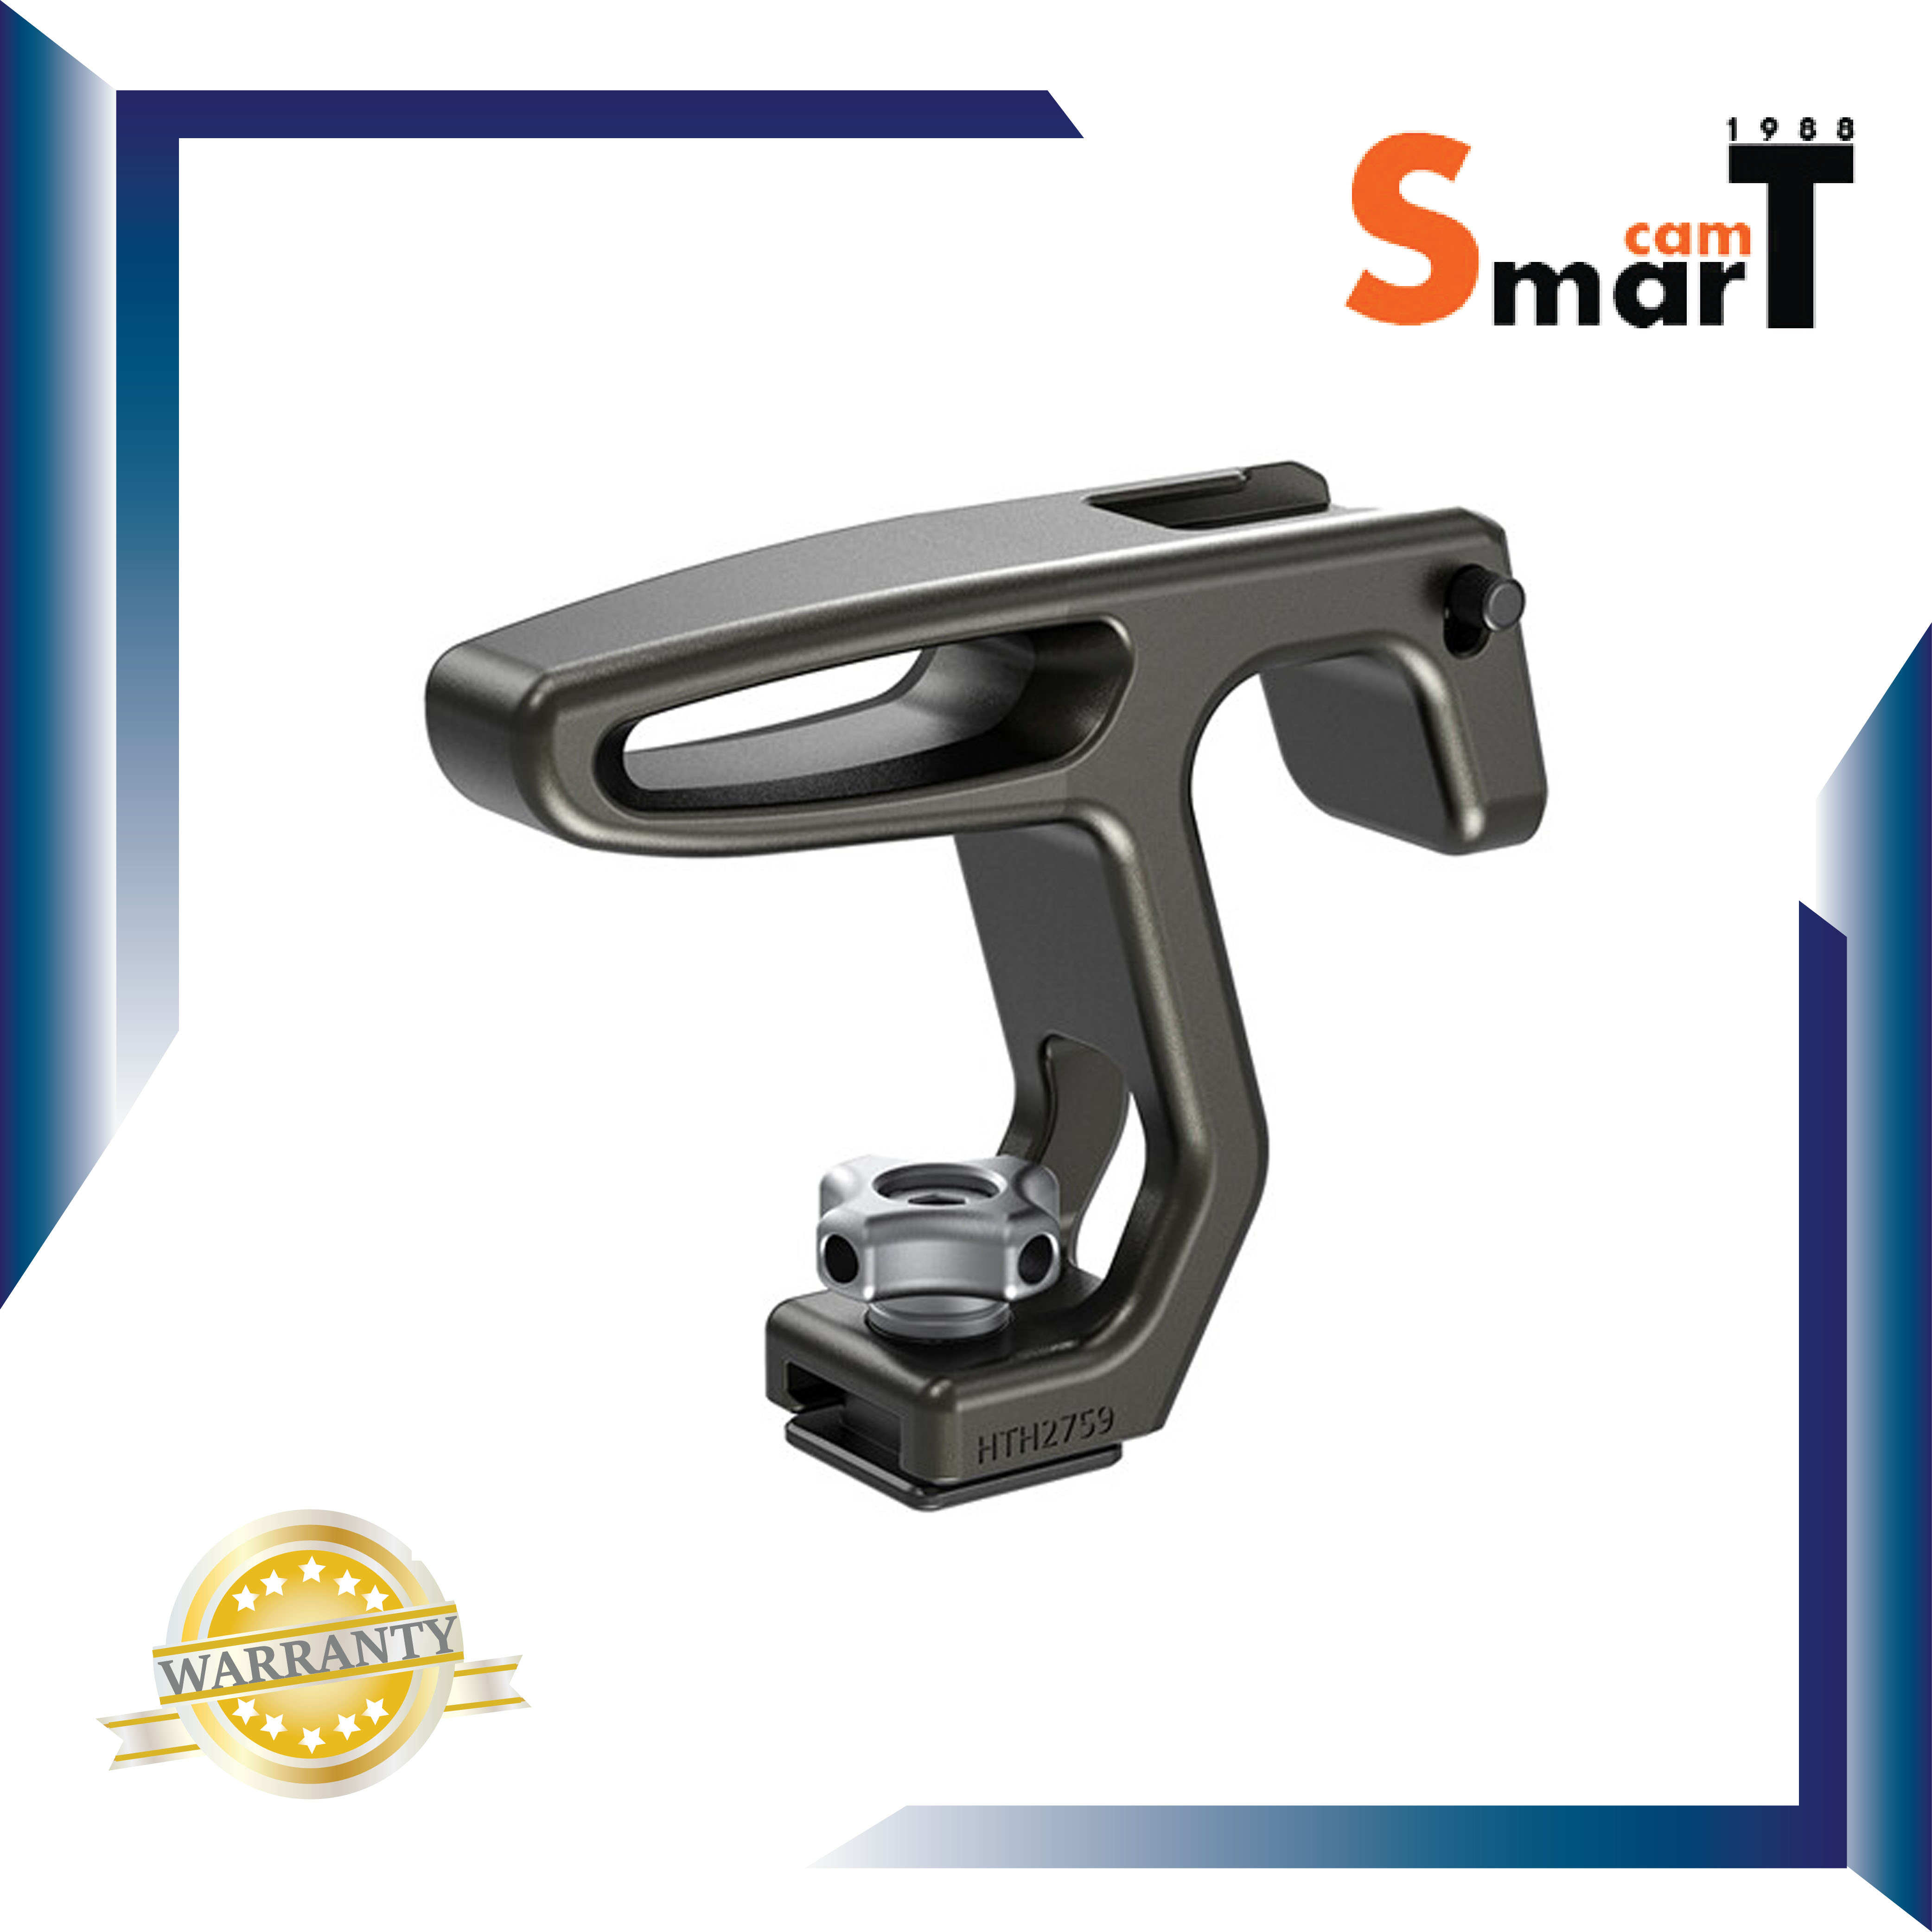 SmallRig HTH2759 Mini Top Handle for Light-weight Cameras (Cold Shoe Mount) - ประกันศูนย์ไทย